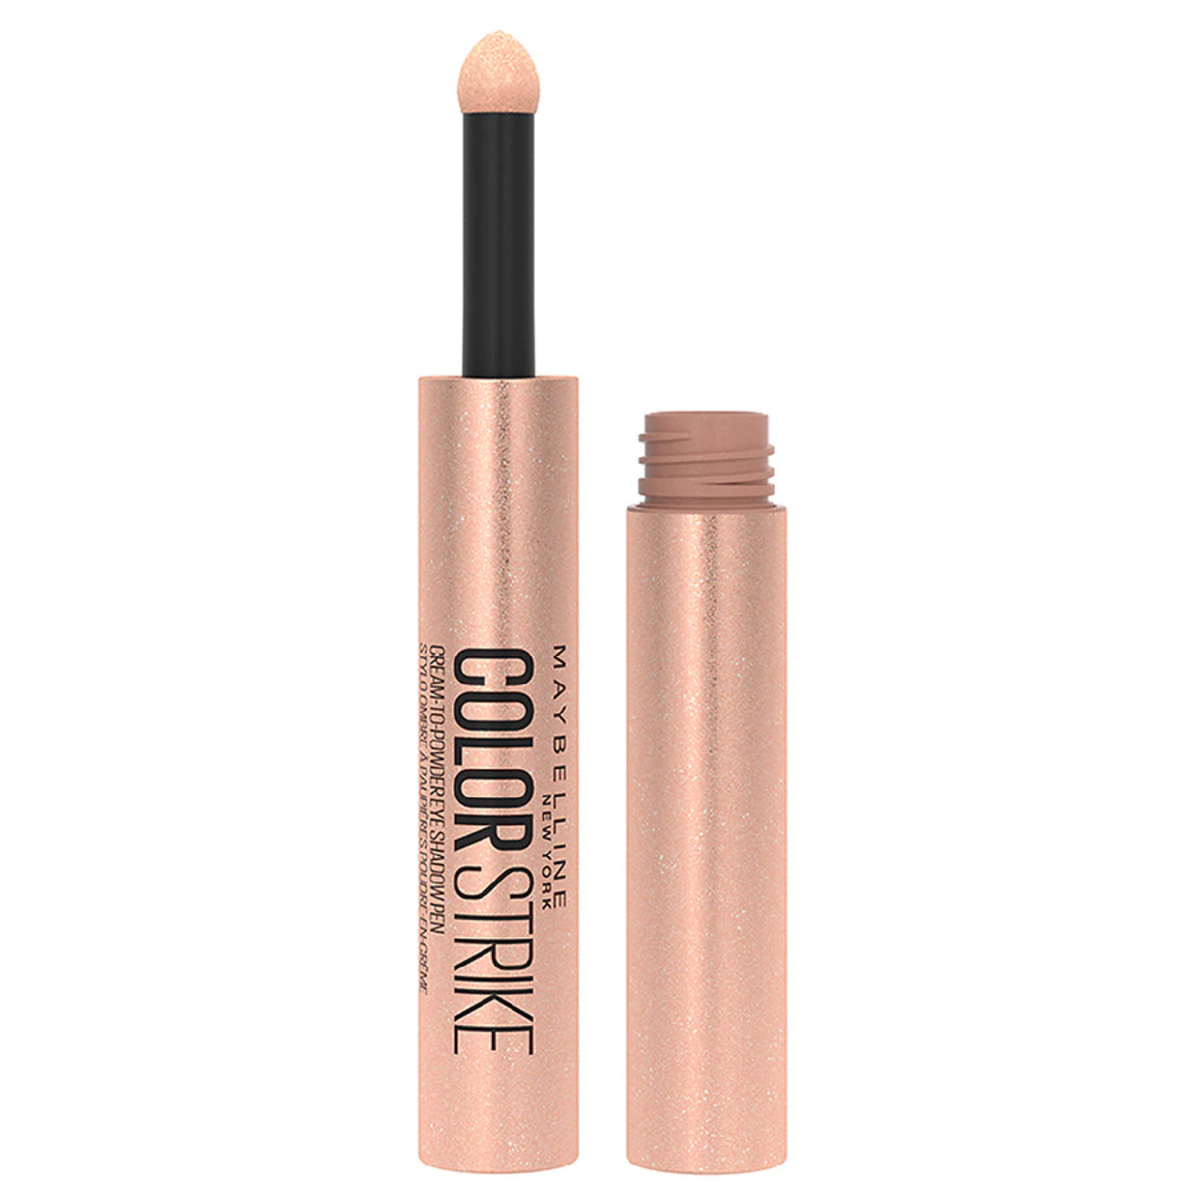 Maybelline Color Strike Cream-to-Powder Eyeshadow Pen in Spark, $9, available here.